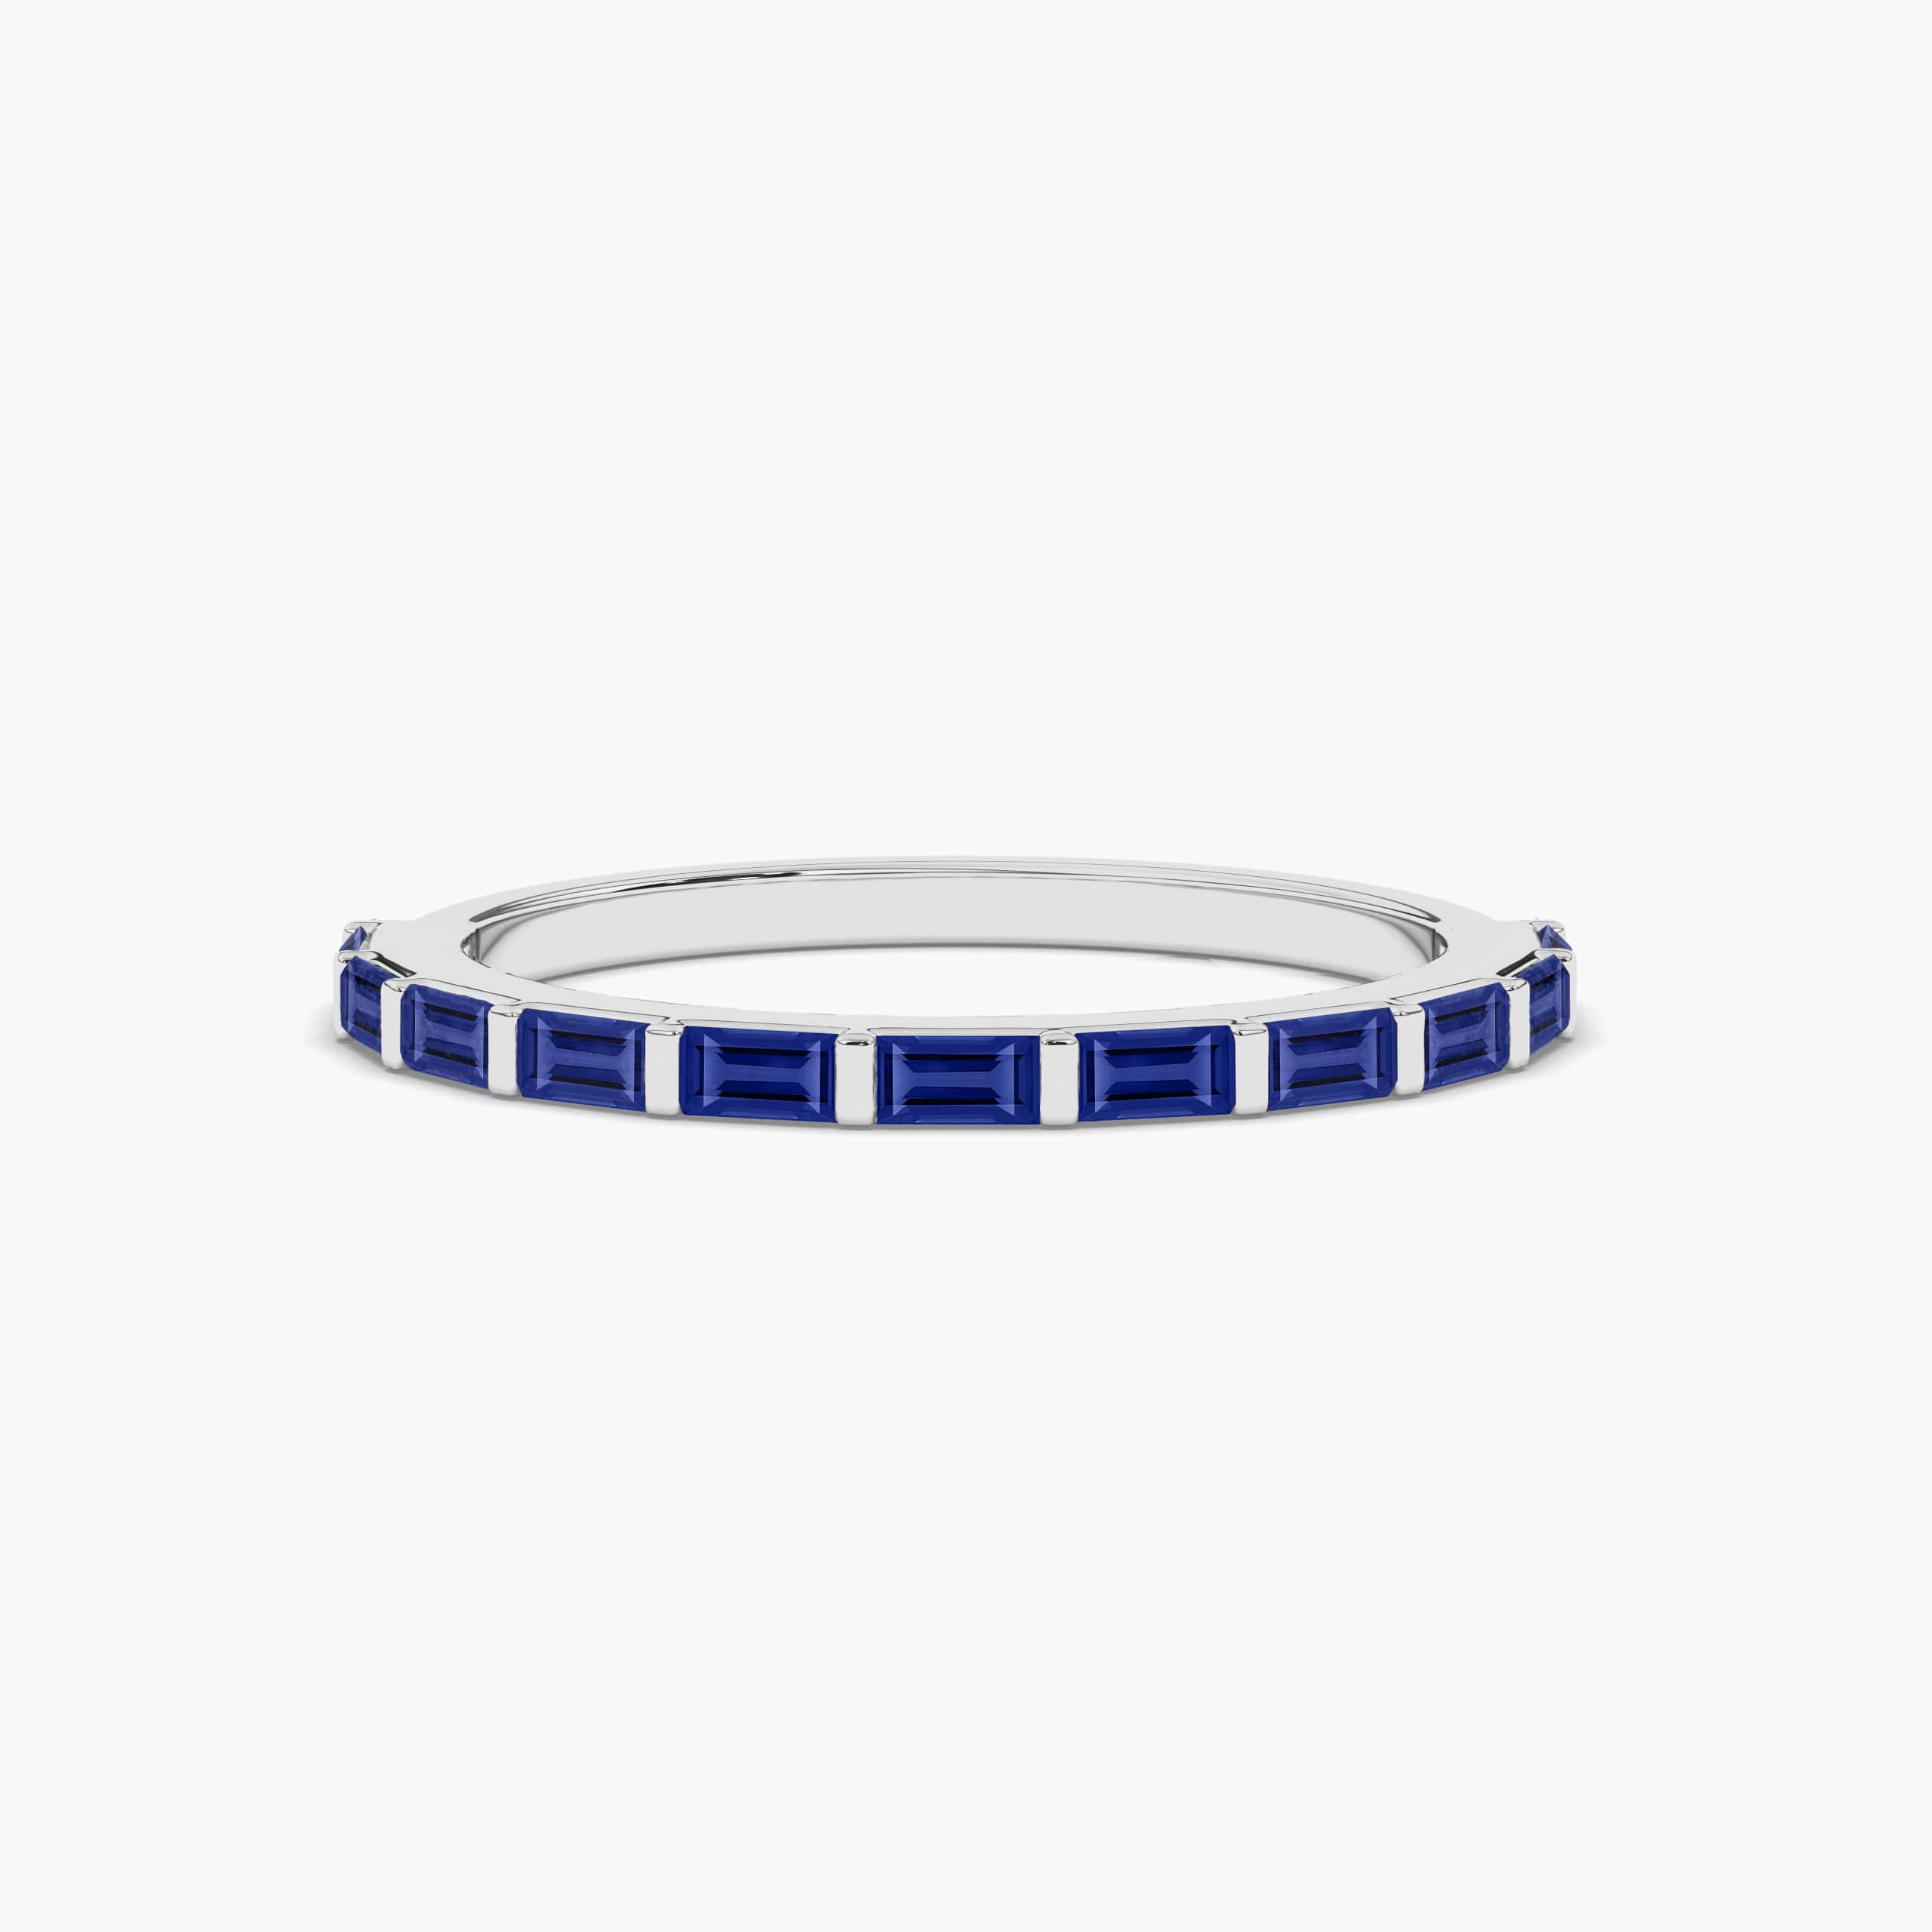 WHITE GOLD BAGUETTE SAPPHIRE WEDDING BAND